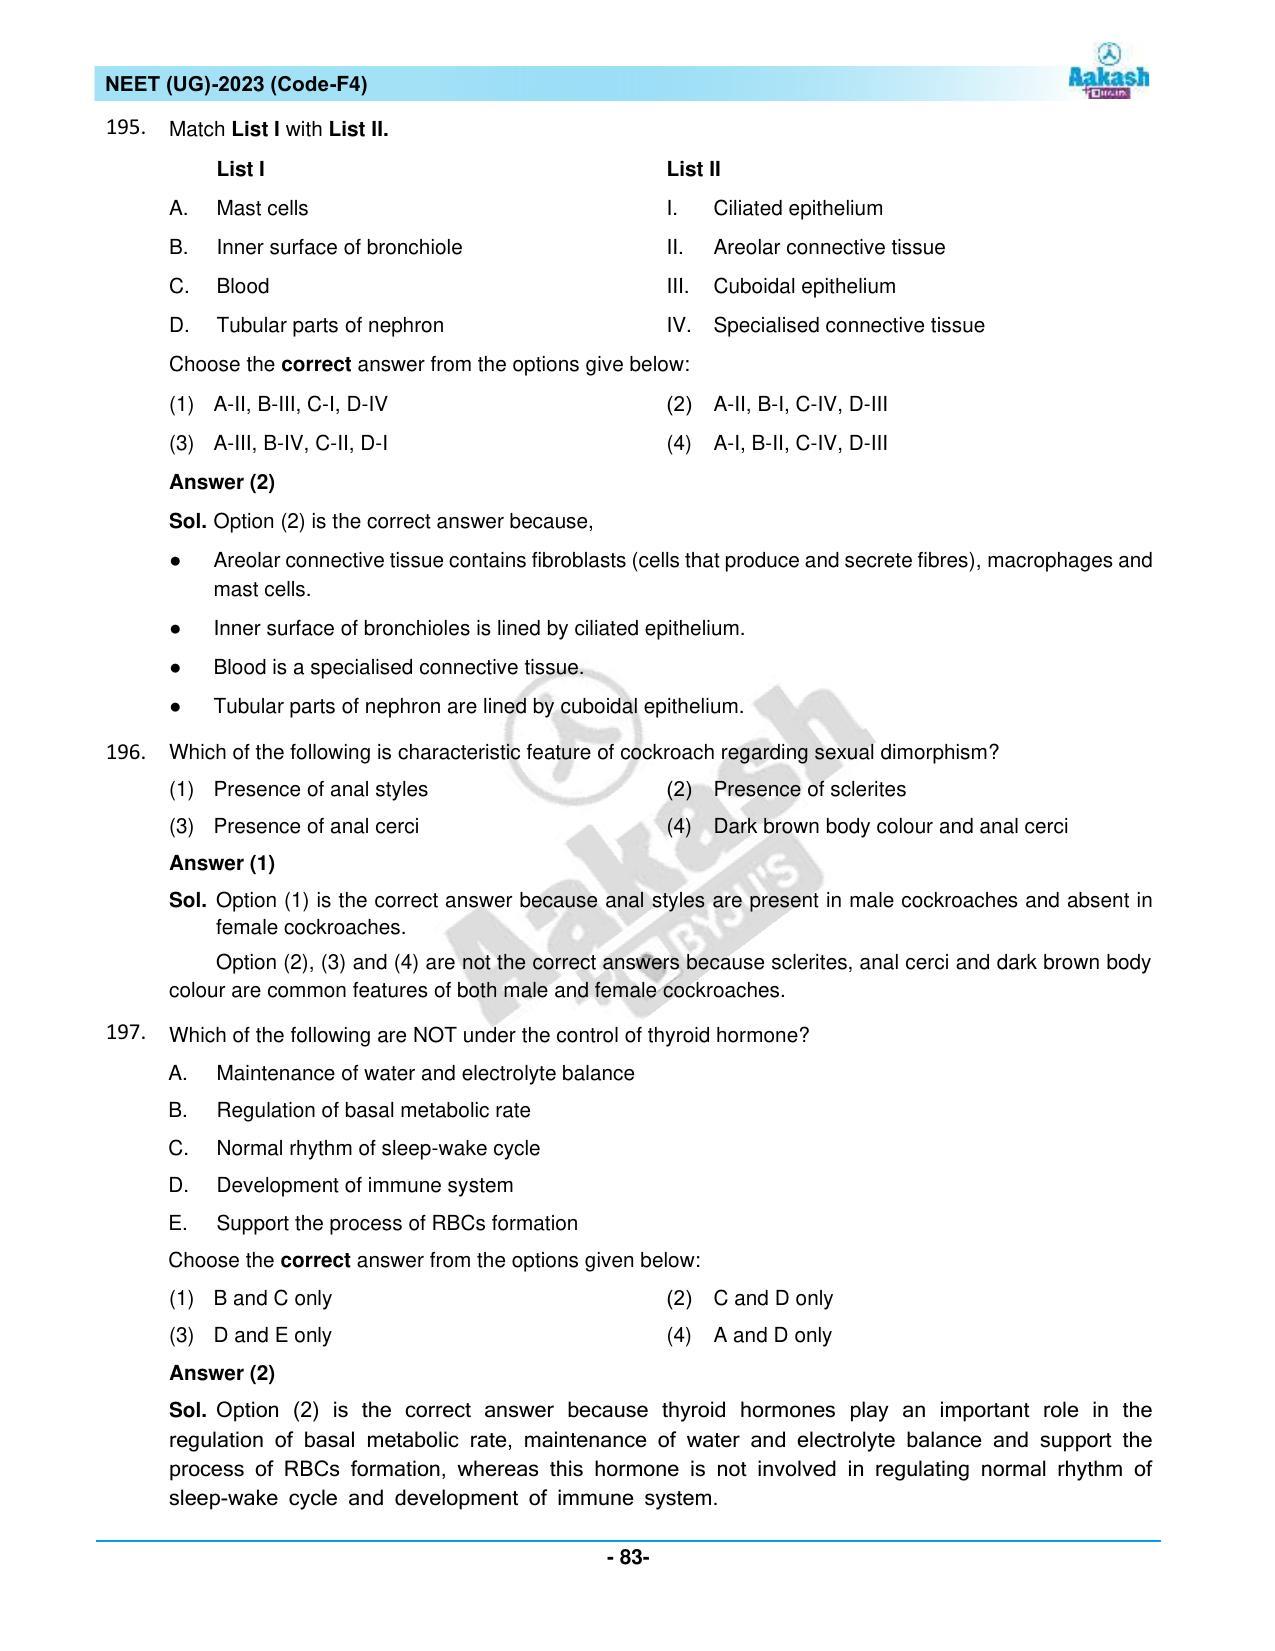 NEET 2023 Question Paper F4 - Page 83